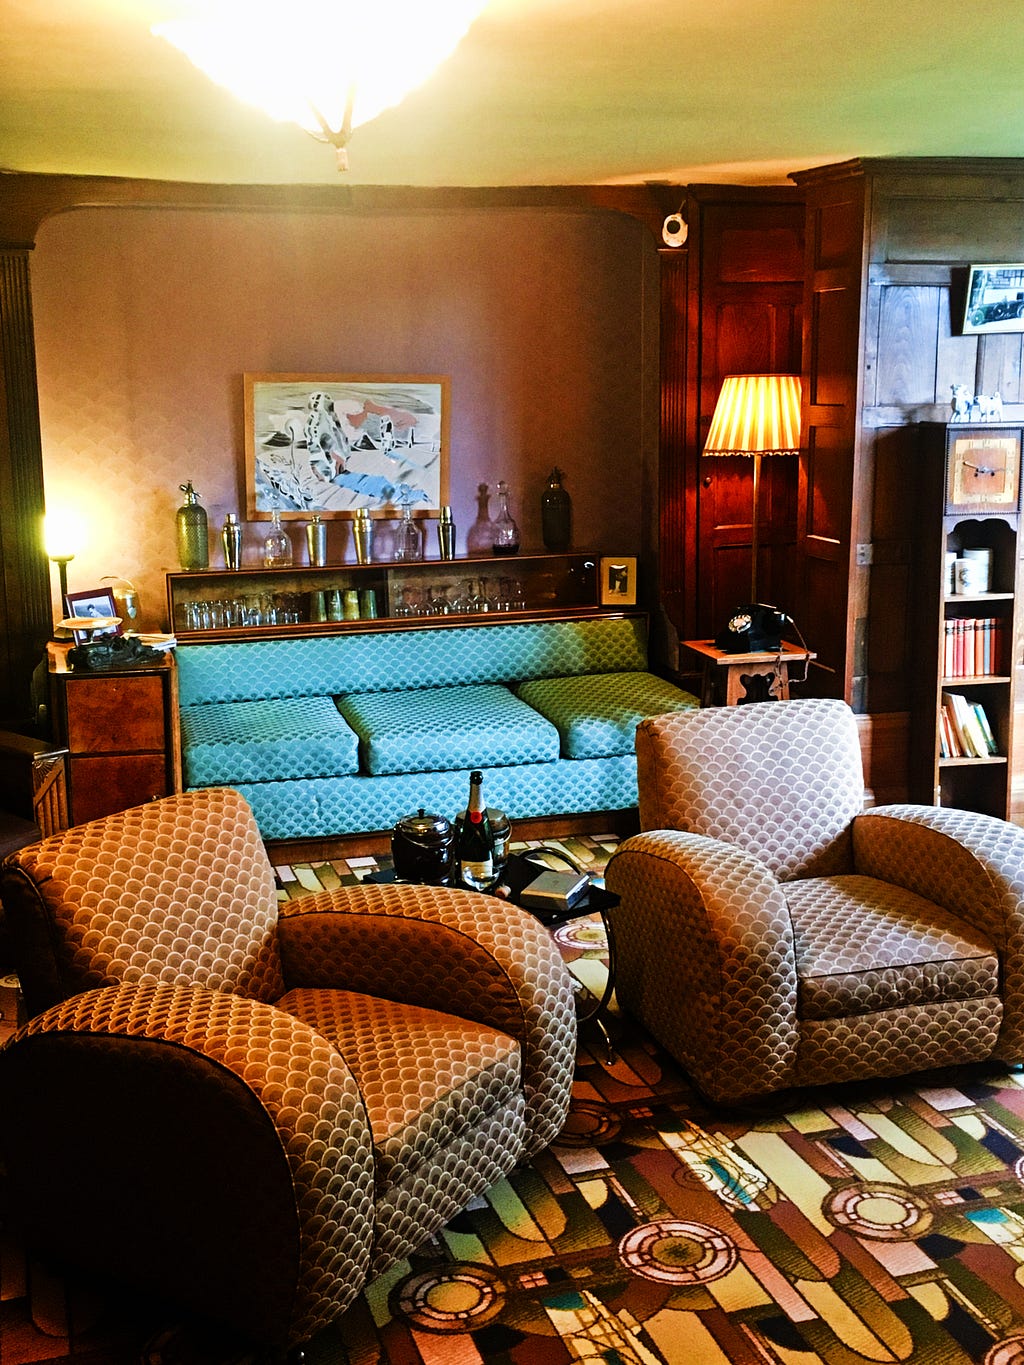 1930s deco living room with lounge suite, lamps and book shelves